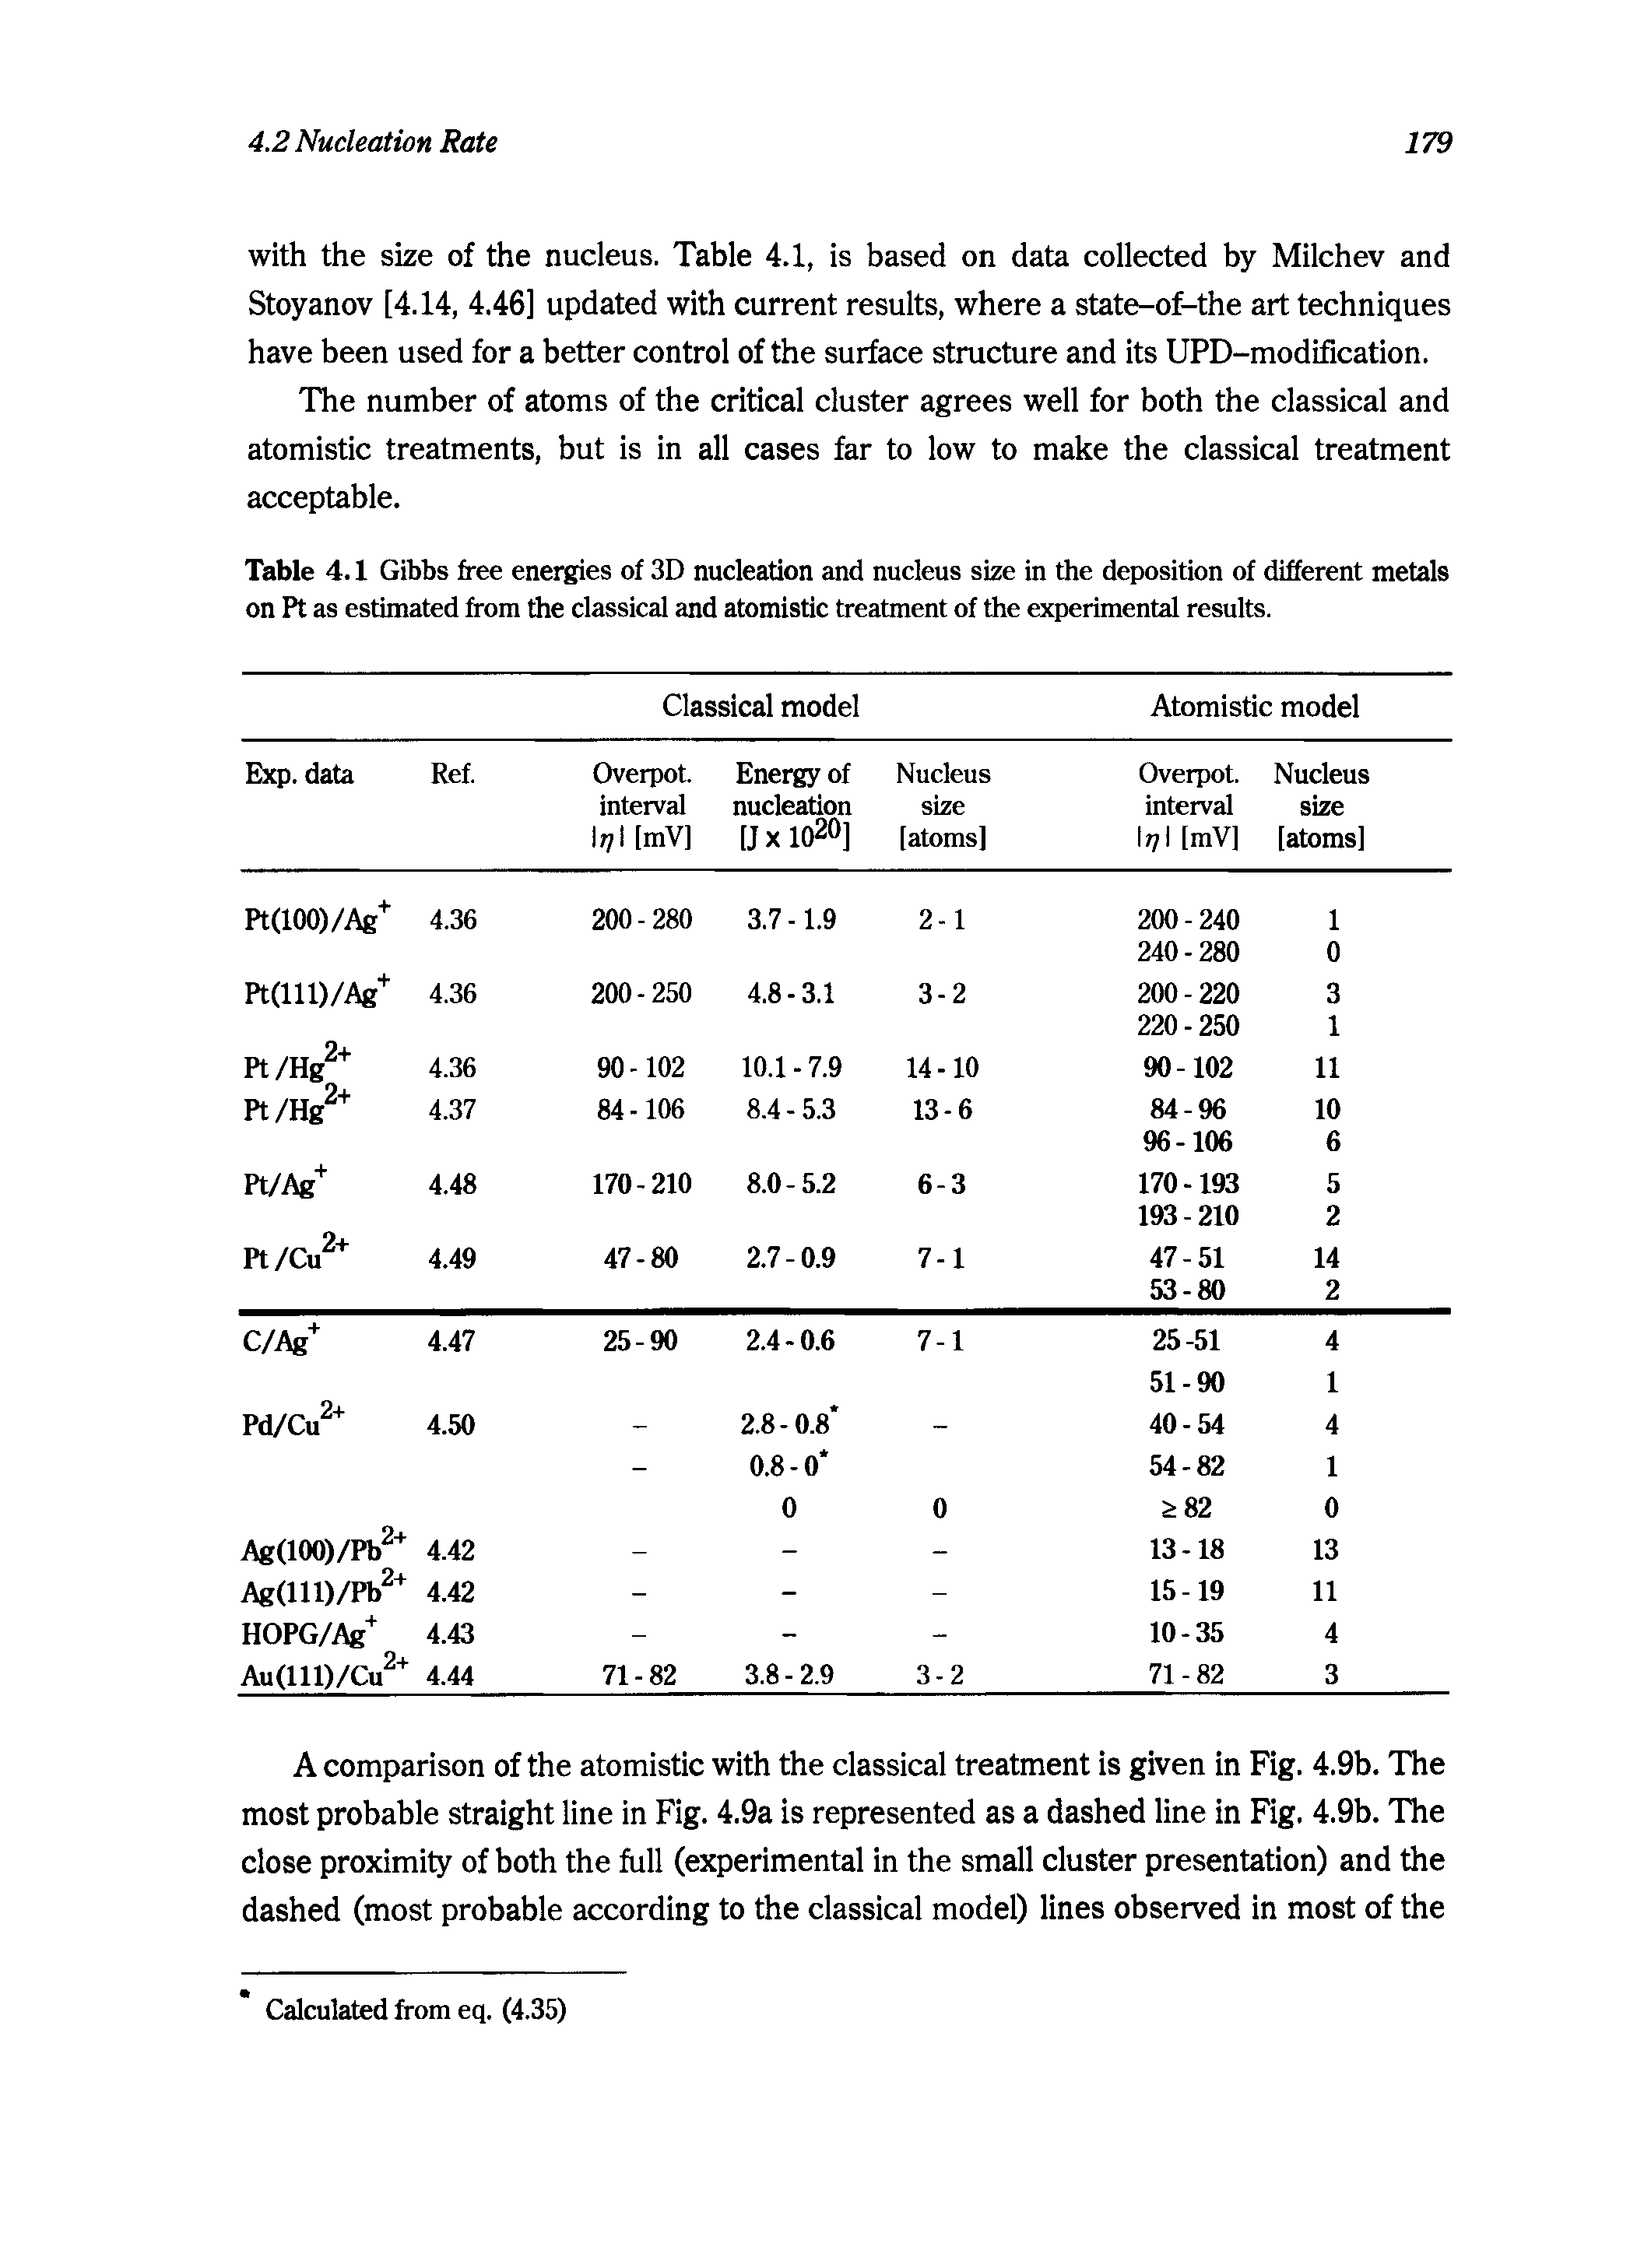 Table 4.1 Gibbs free energies of 3D nucleation and nucleus size in the deposition of different metals on Pt as estimated from the classical and atomistic treatment of the experimental results.